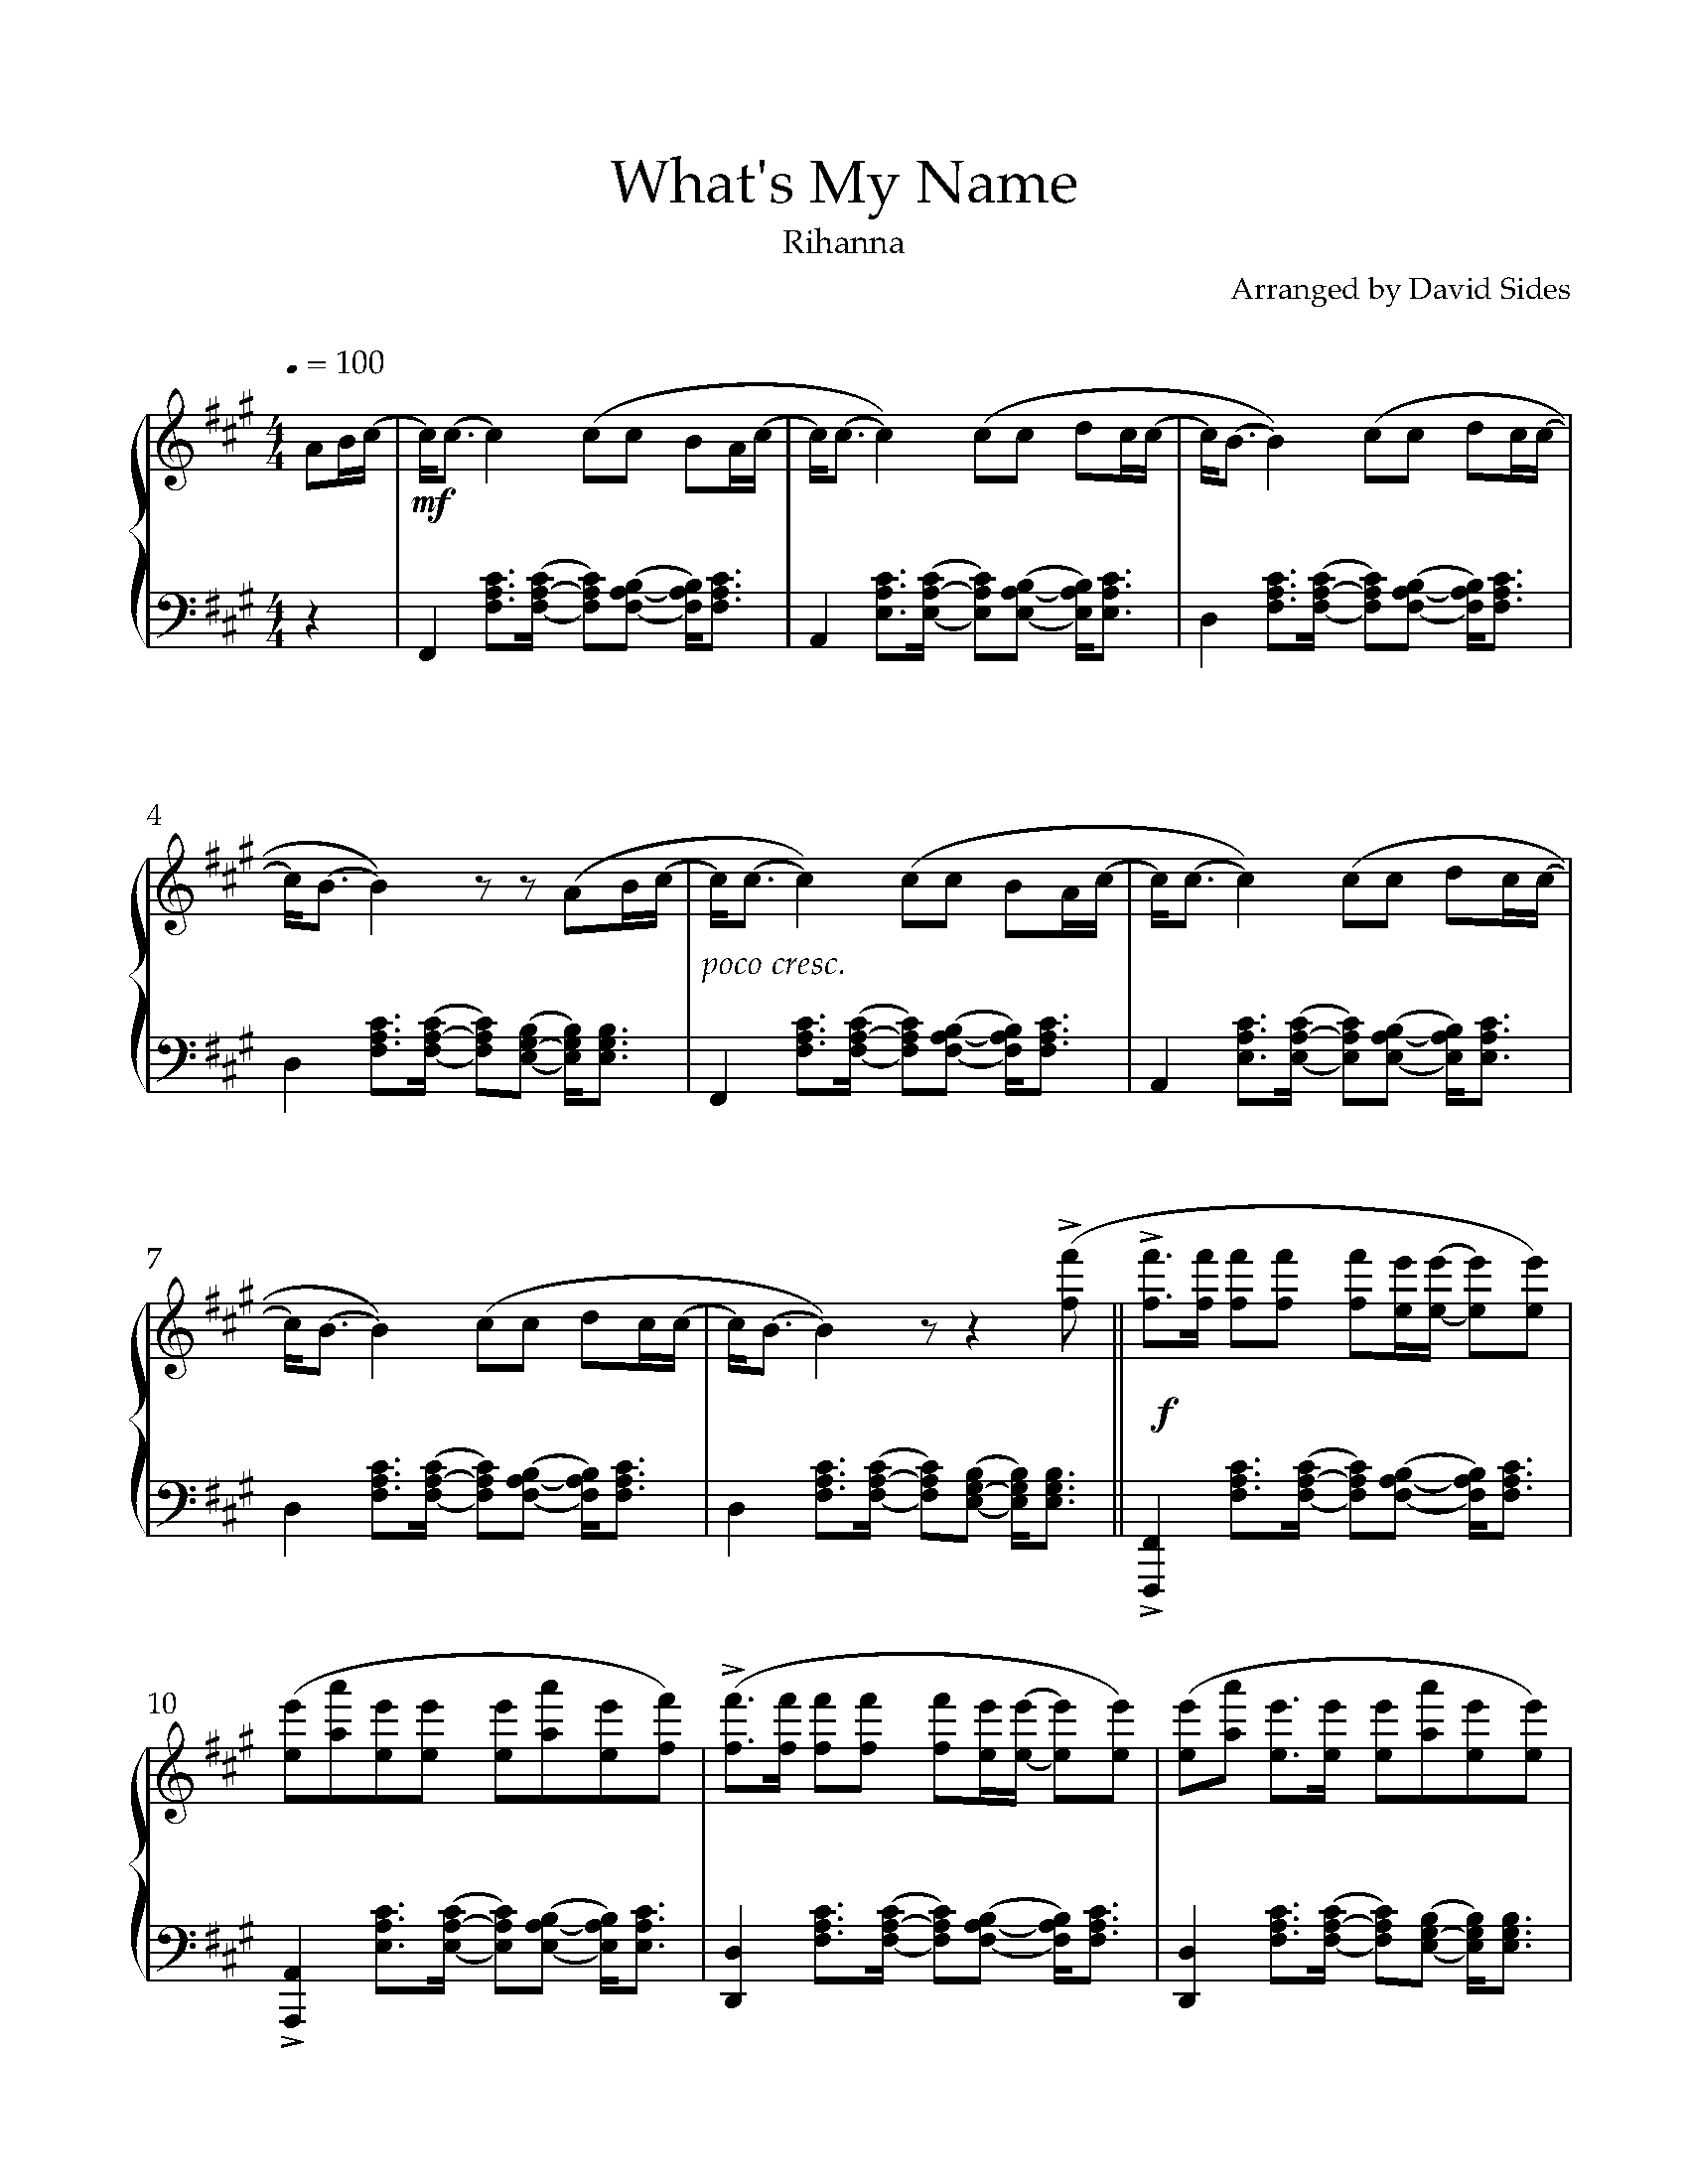 What's My Name Piano Sheet Music